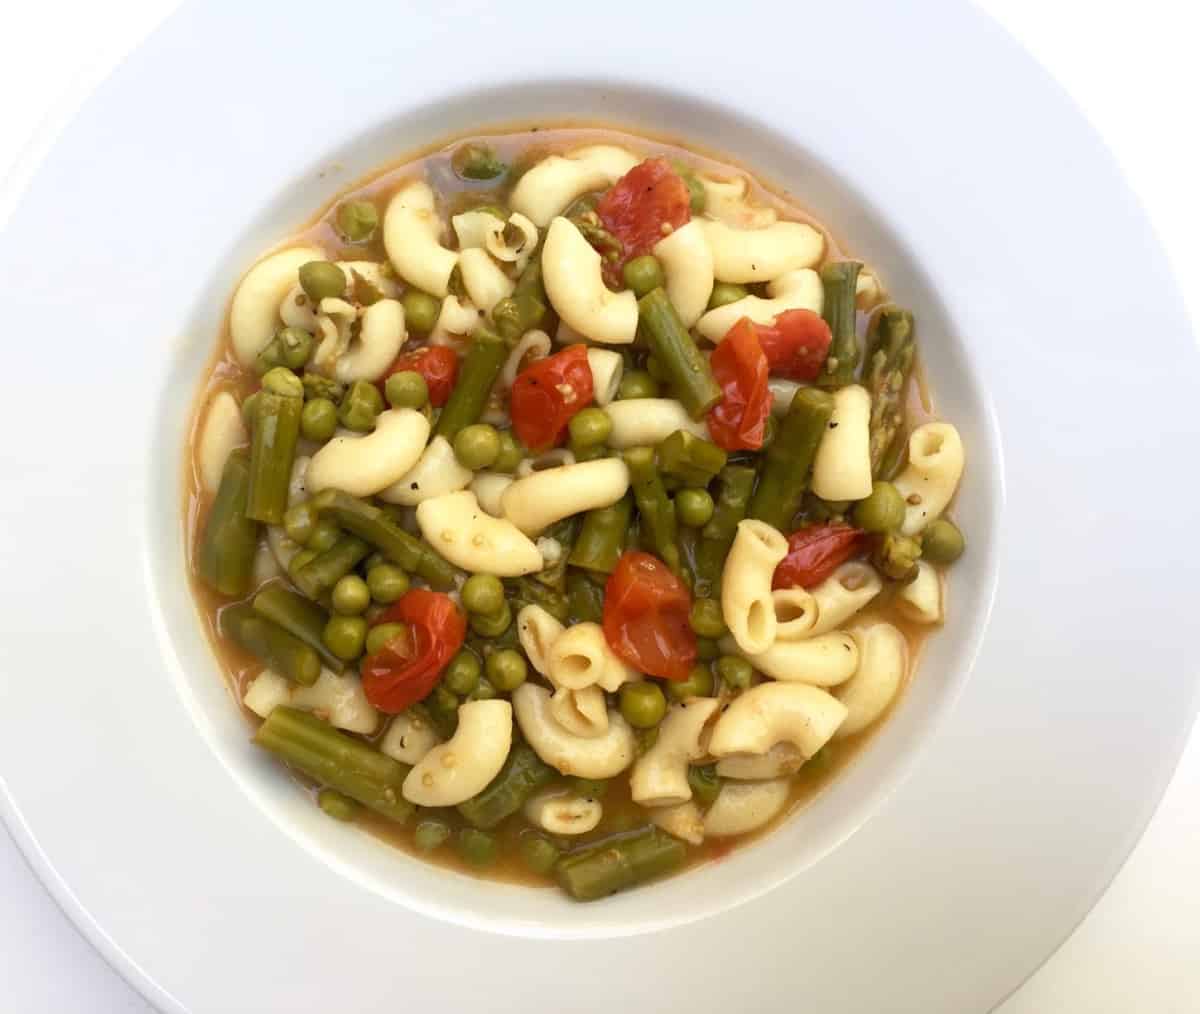 Asparagus Minestrone Soup with wholegrain pasta in white bowl from above.